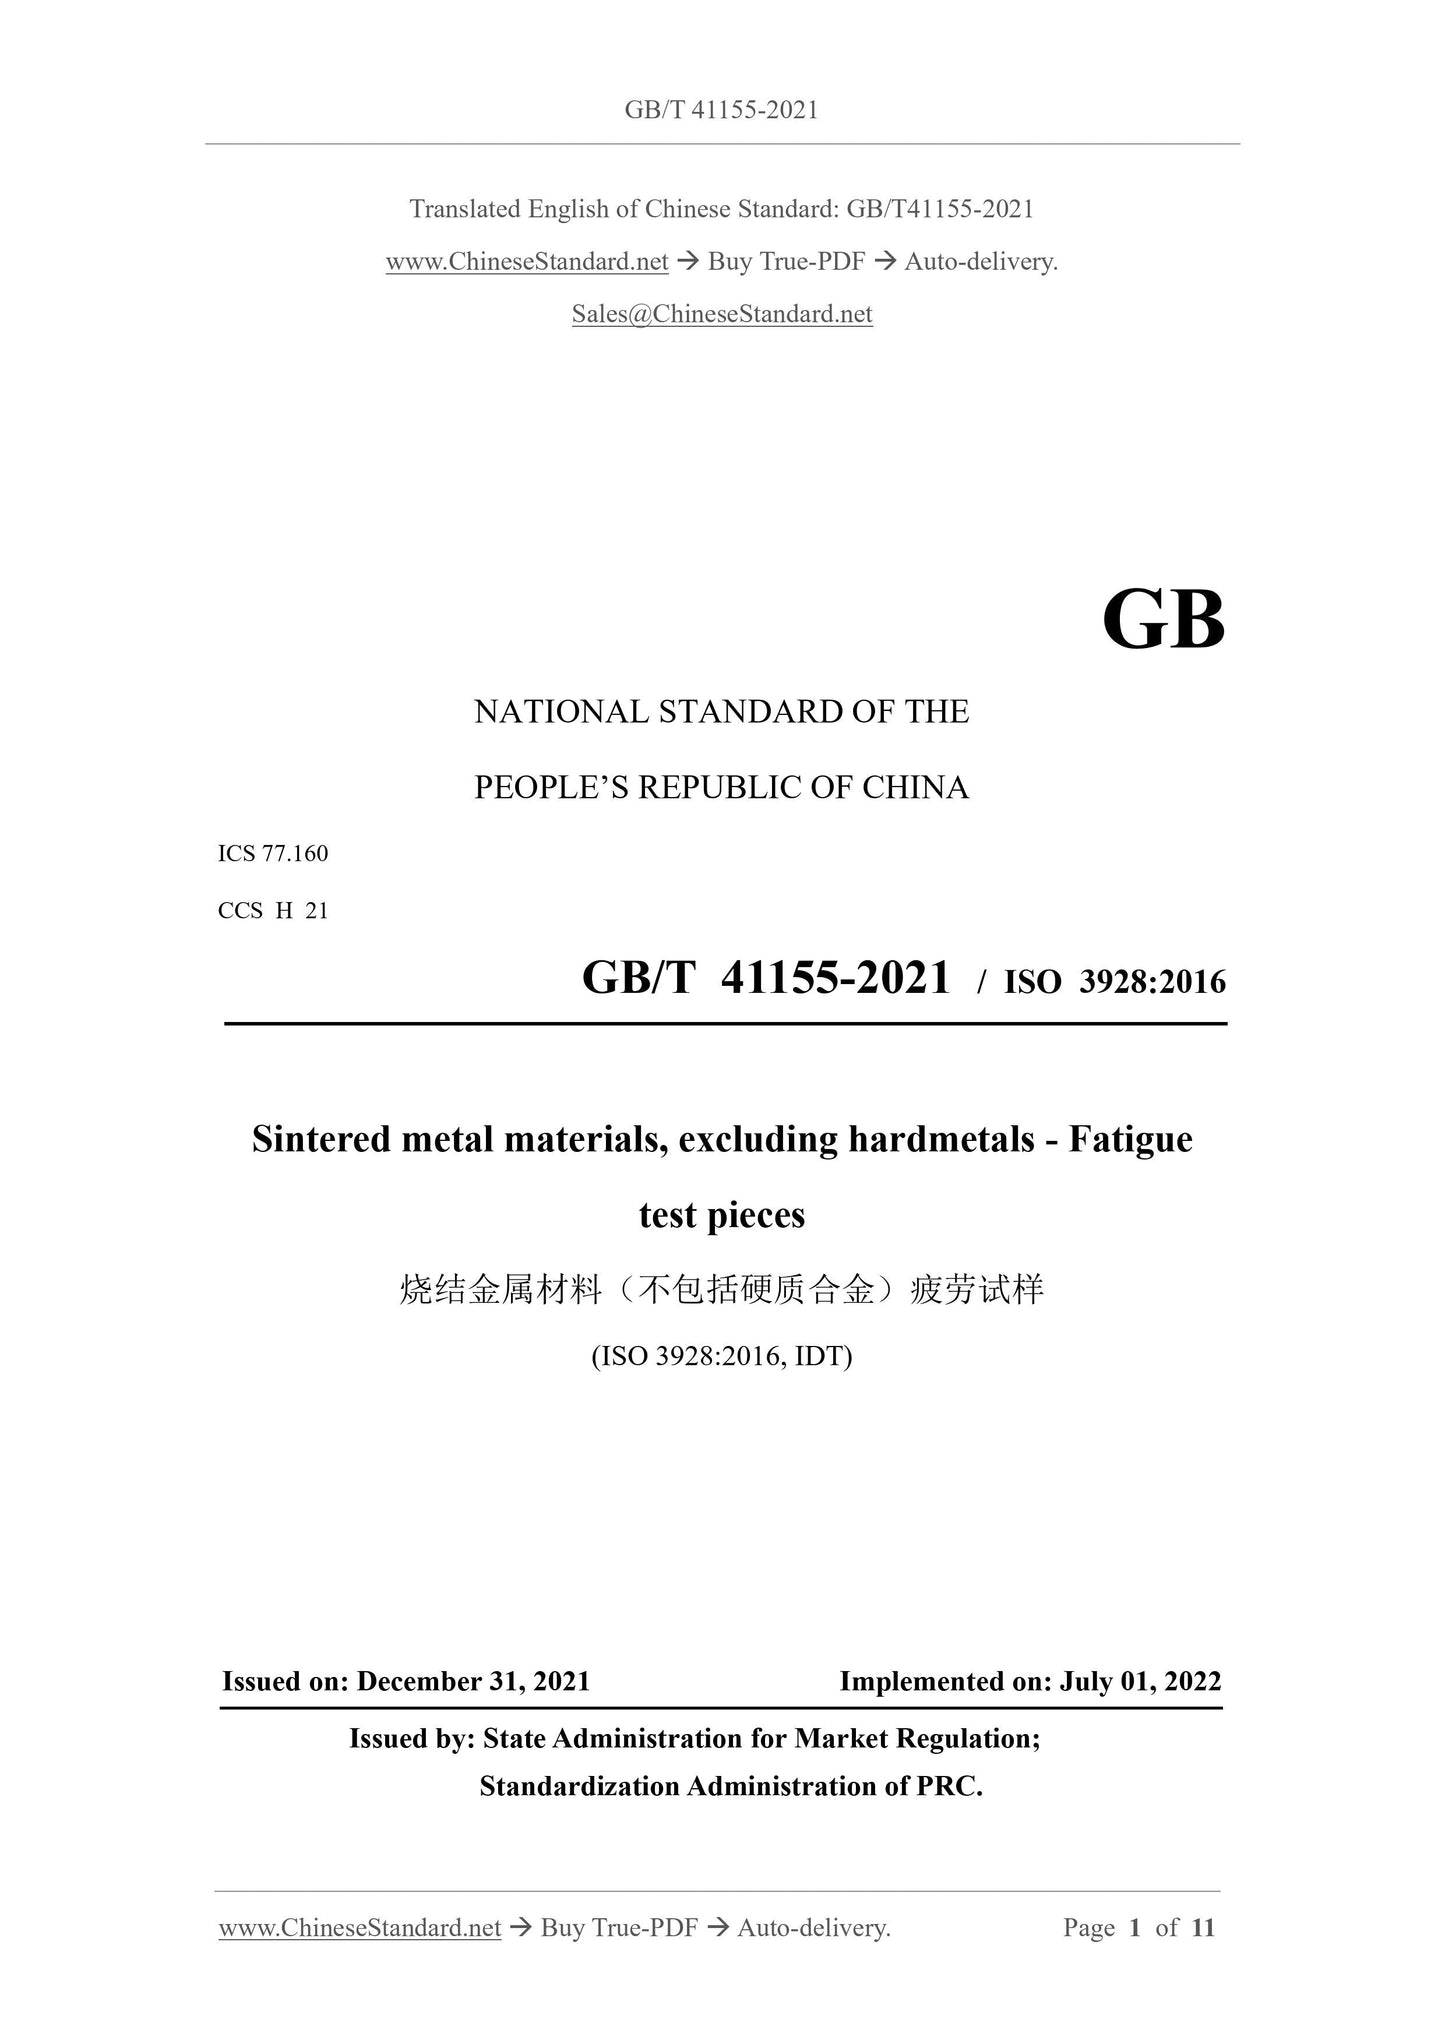 GB/T 41155-2021 Page 1